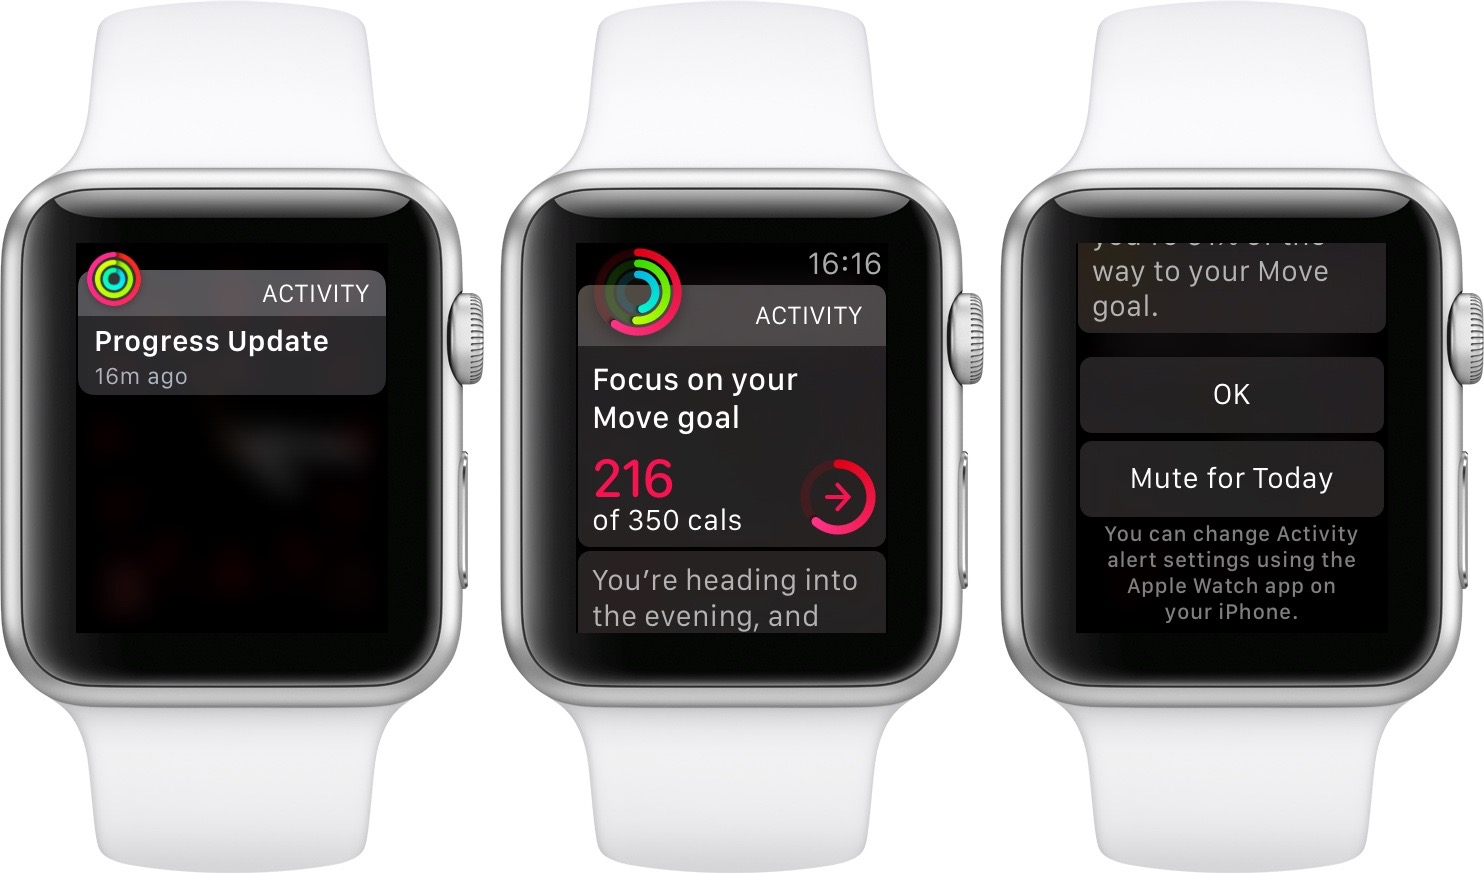 watchOS 2 Mute Activity Reminders For Day Apple Watch screenshot 001